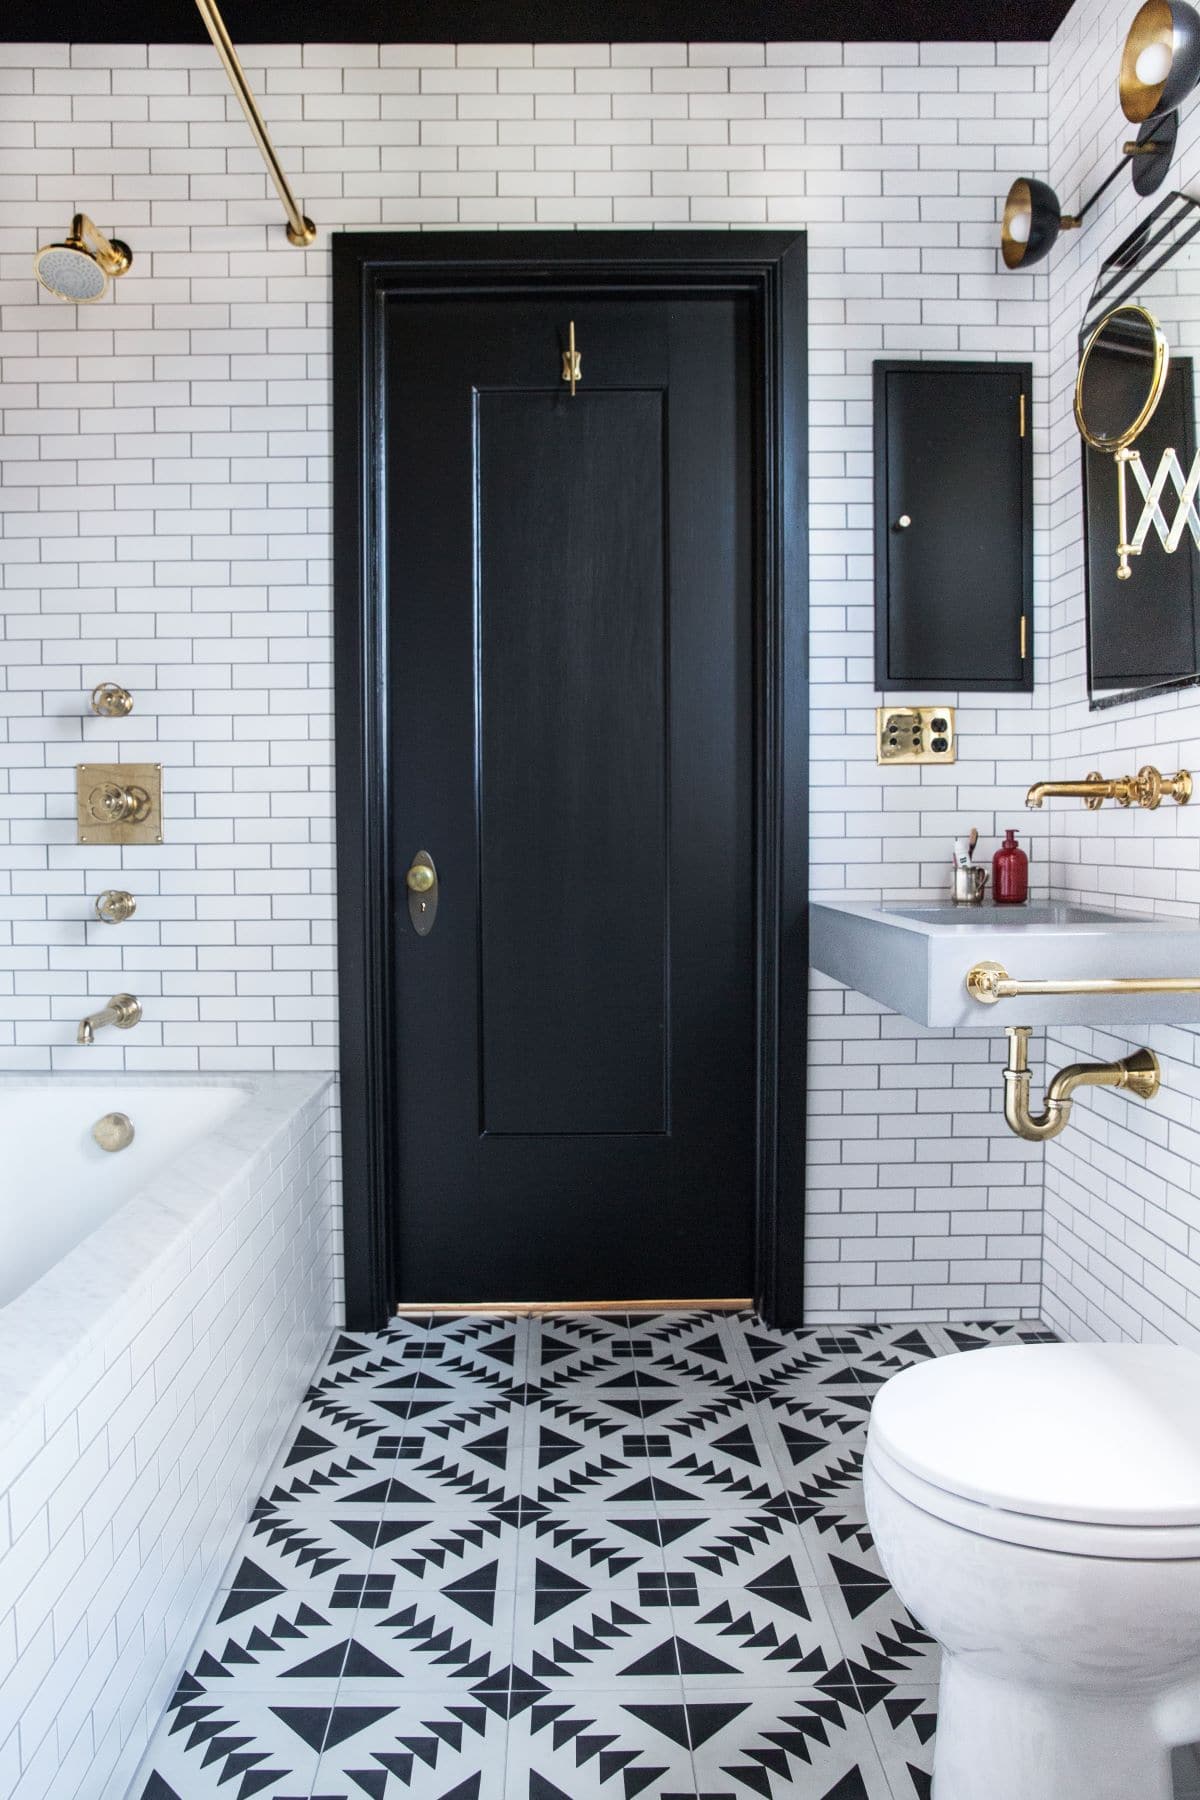 White masonry wall bathroom with black door and golden pipes, knobs, faucets and taps